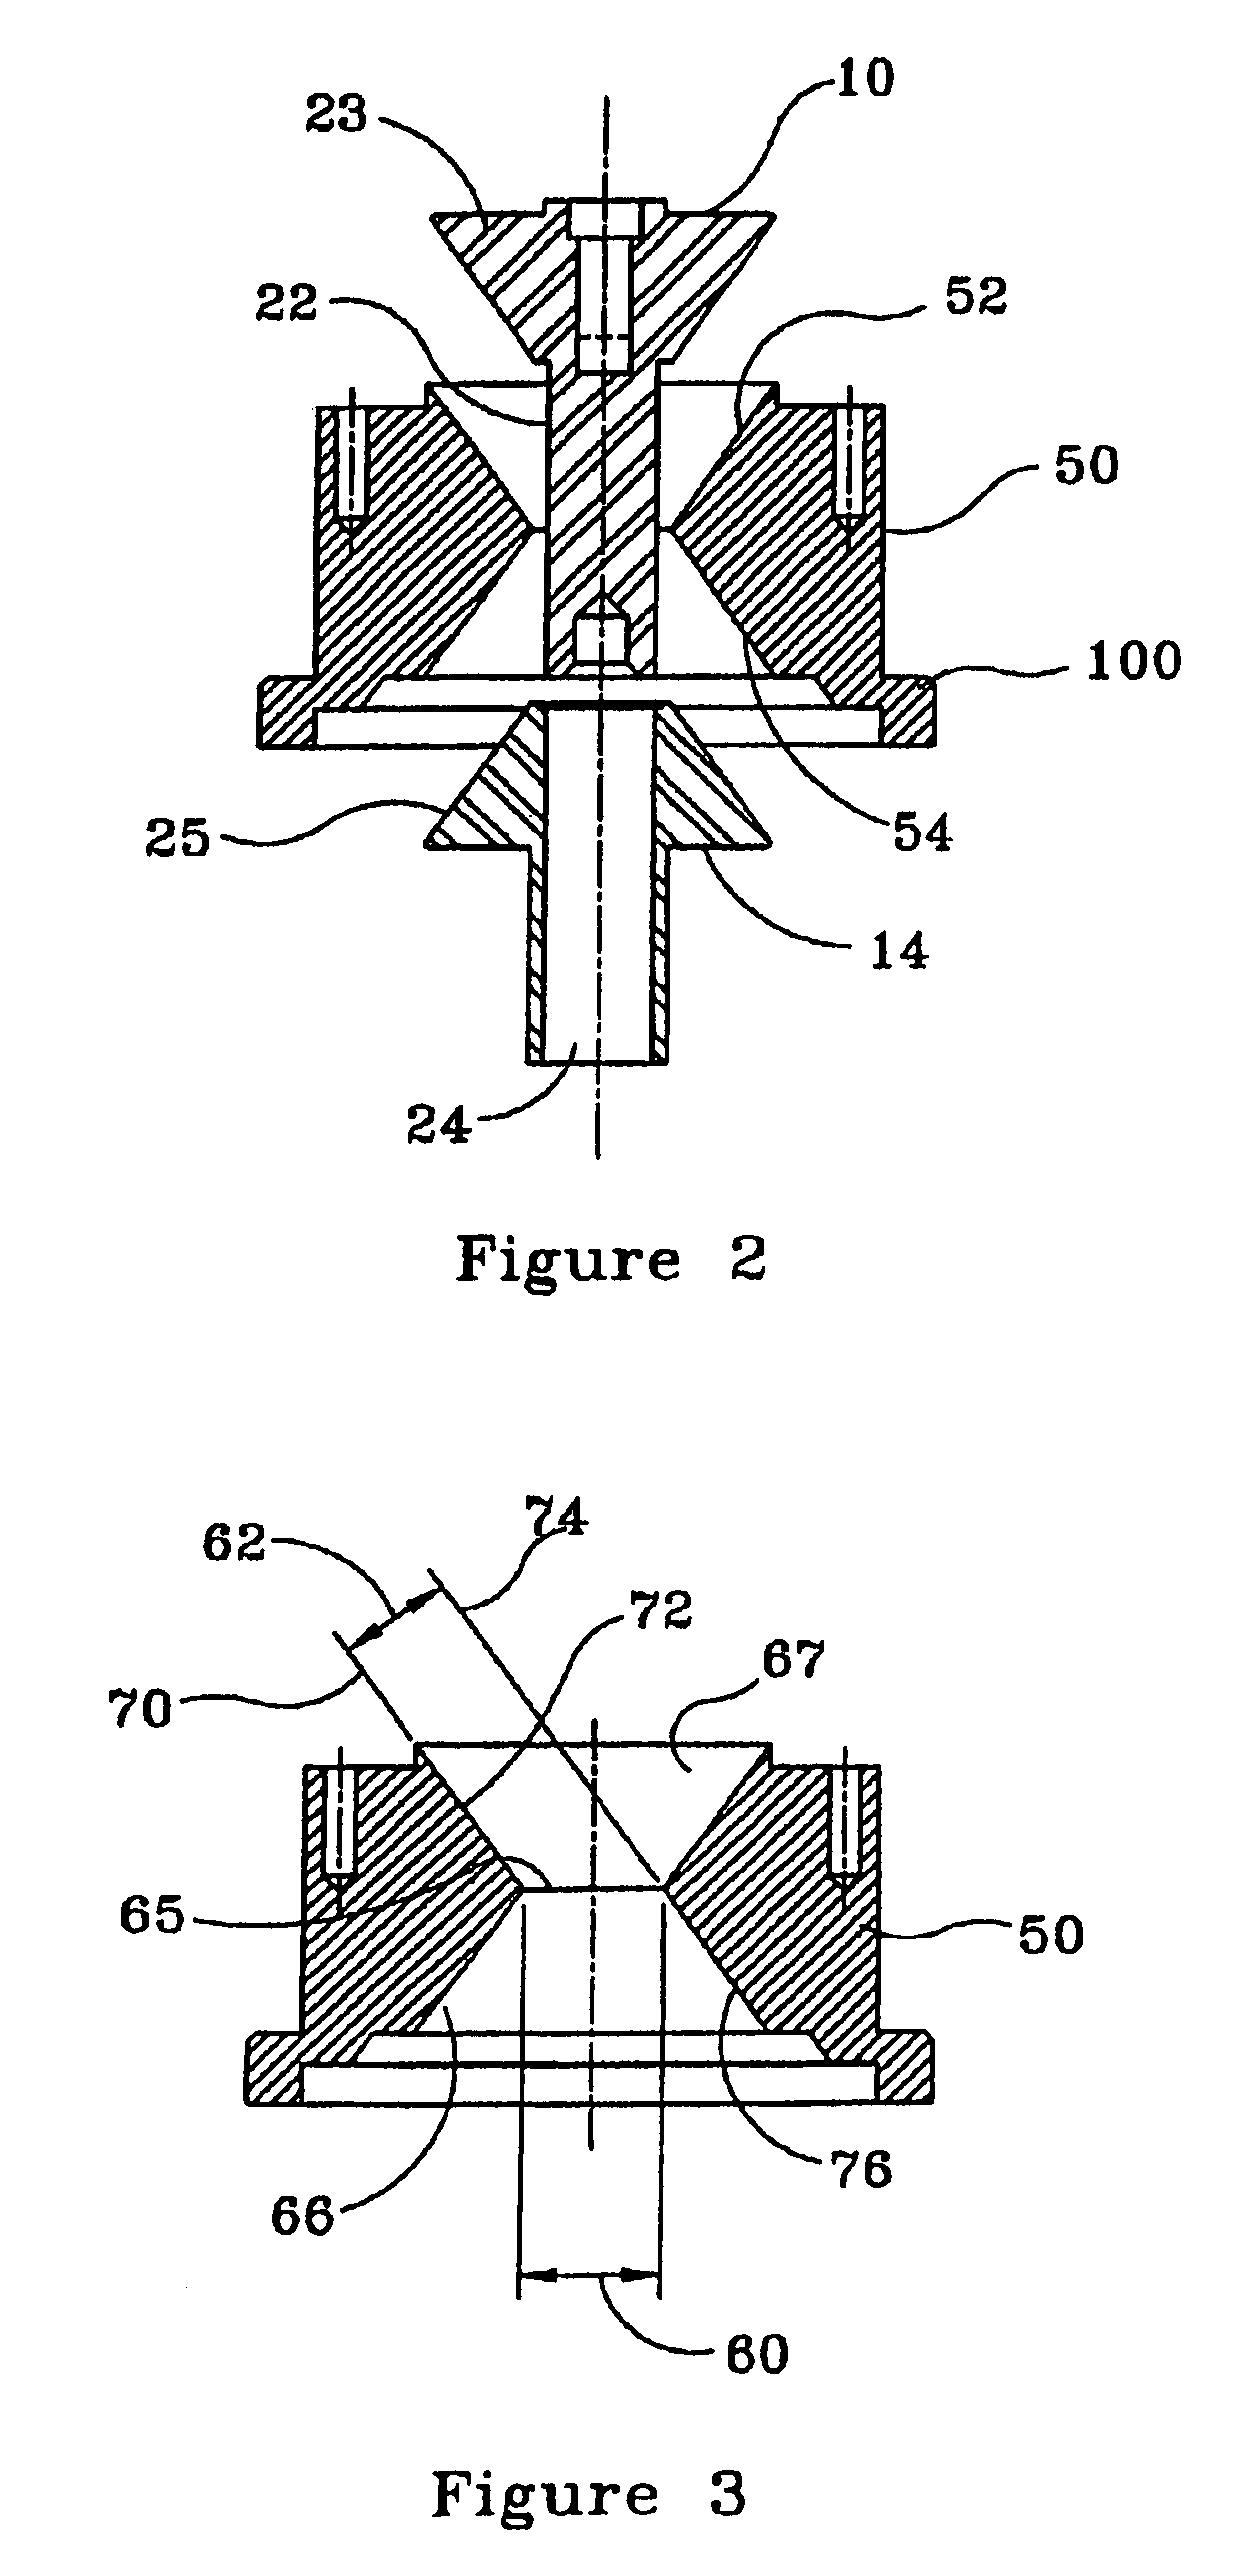 Single piece hub with integral upper and lower female cones